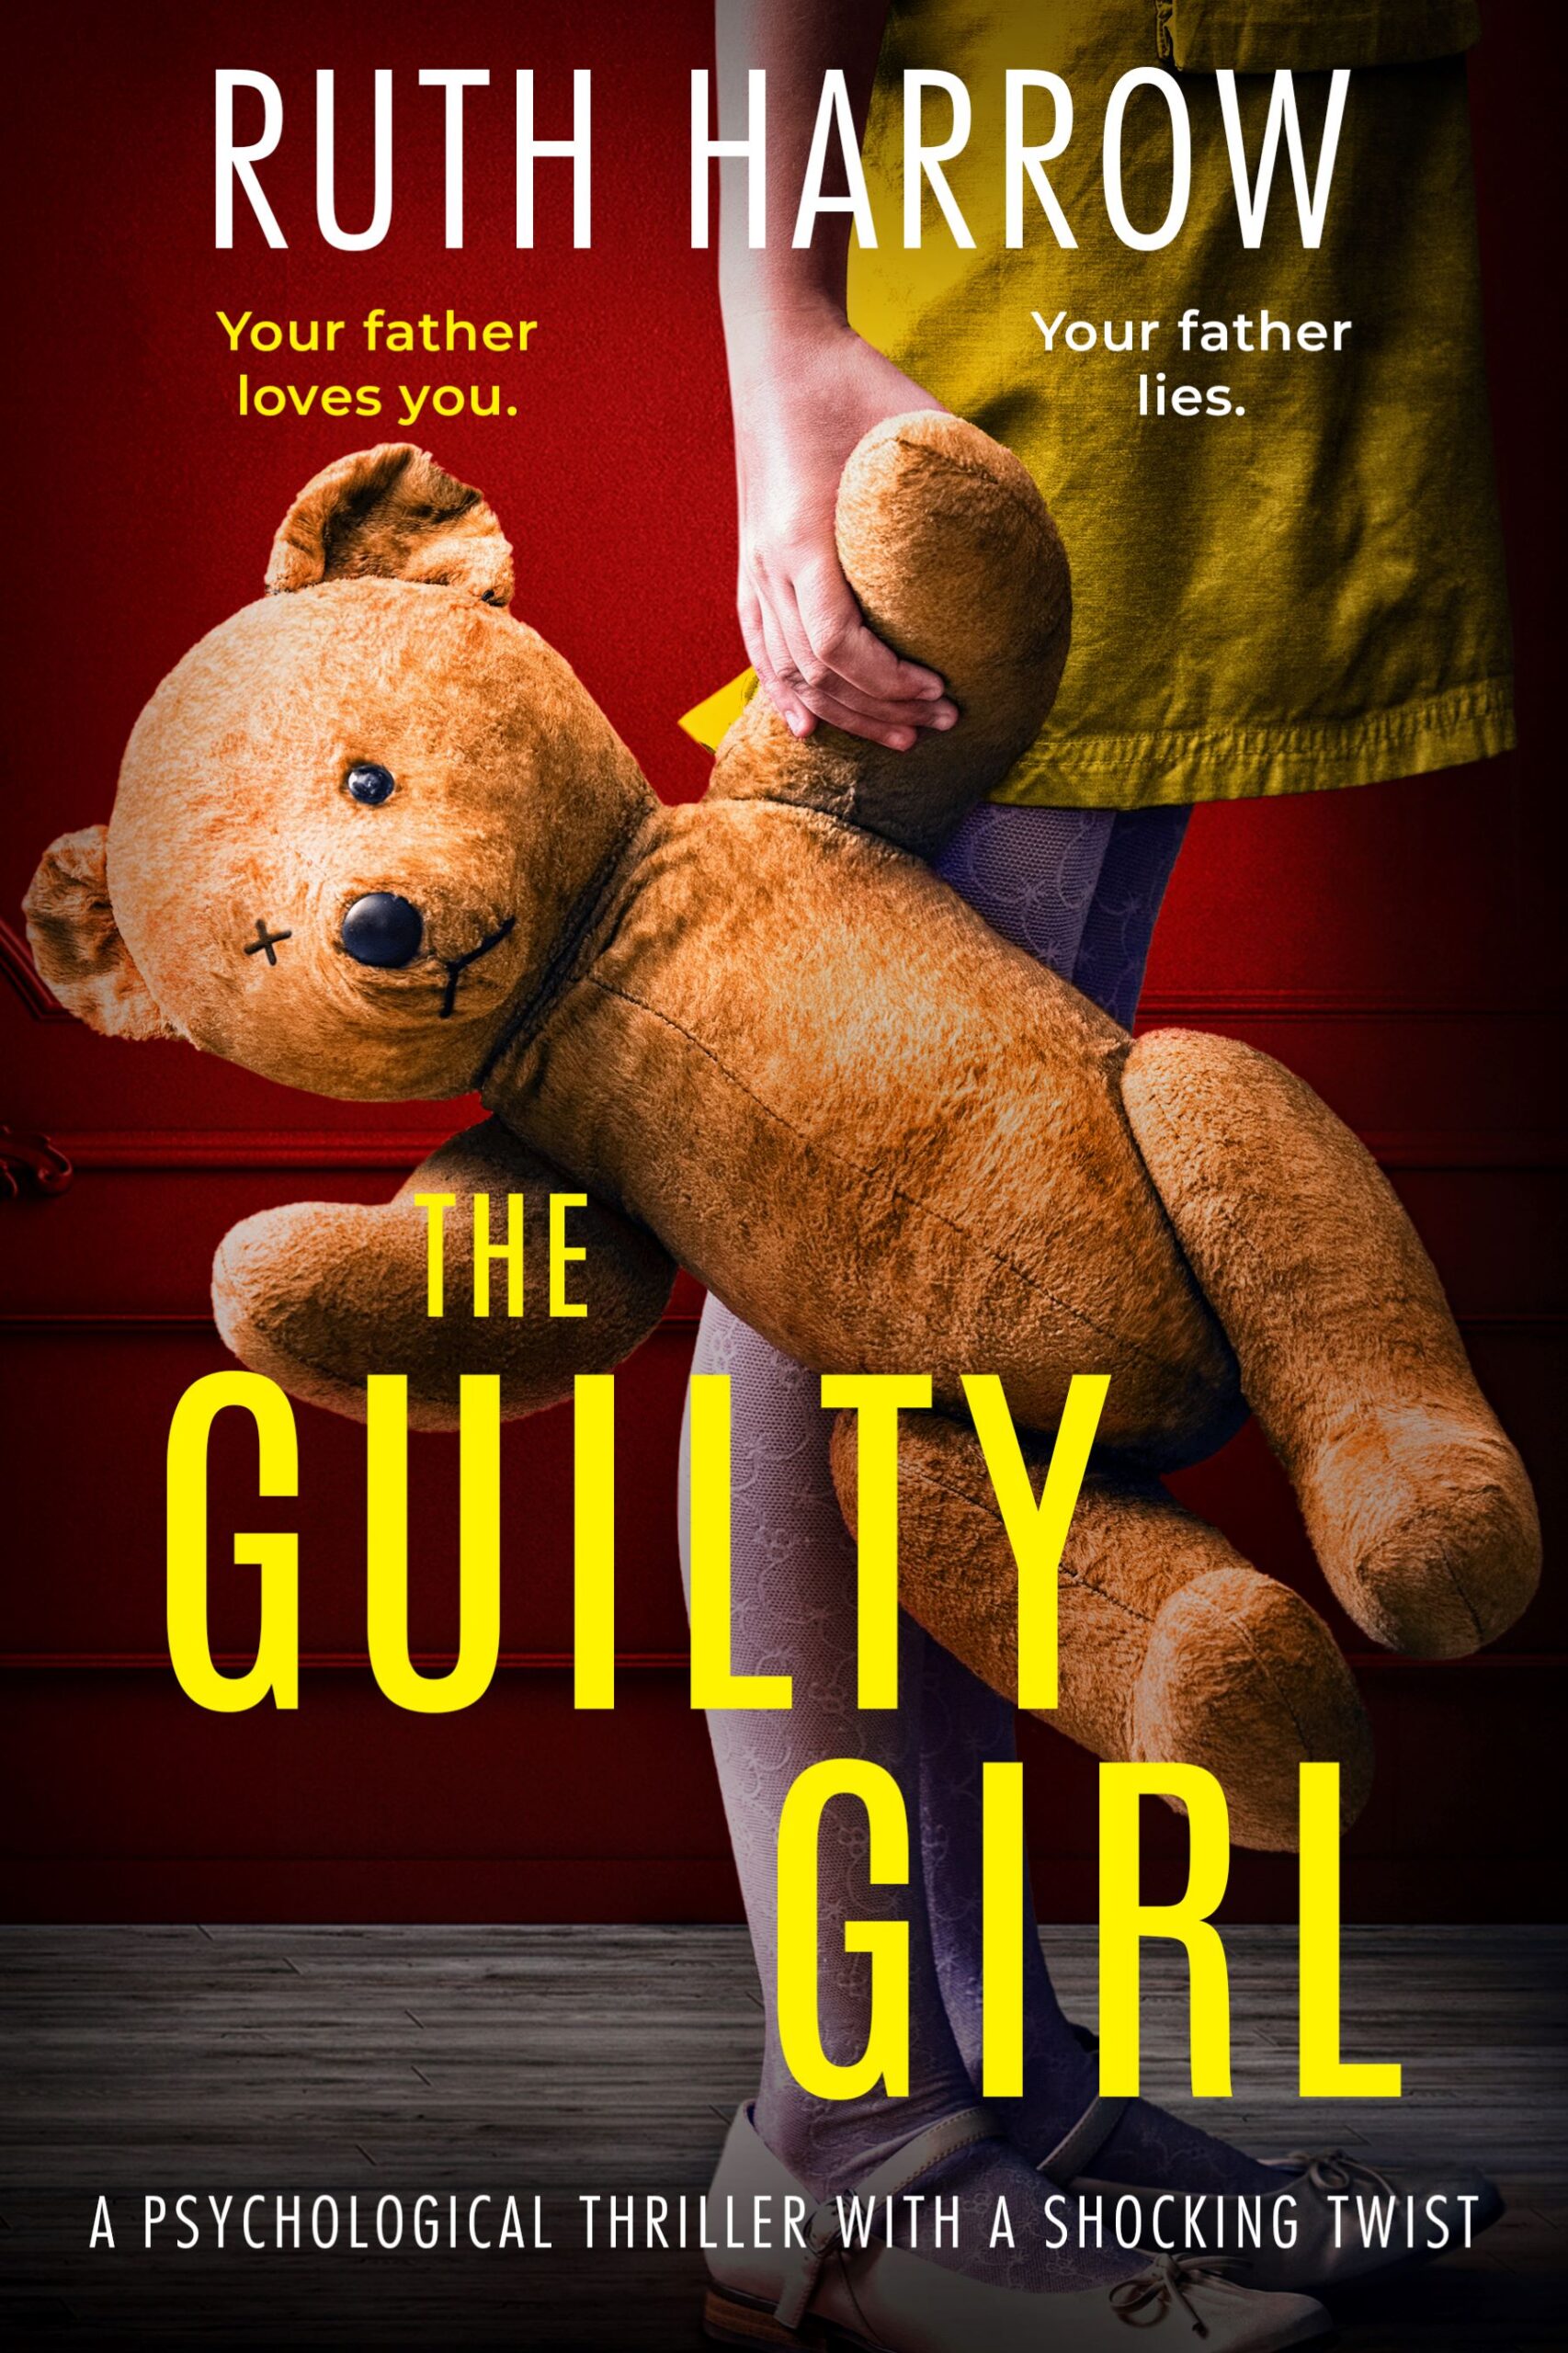 RUTH HARROW NEW RELEASE – THE GUILTY GIRL